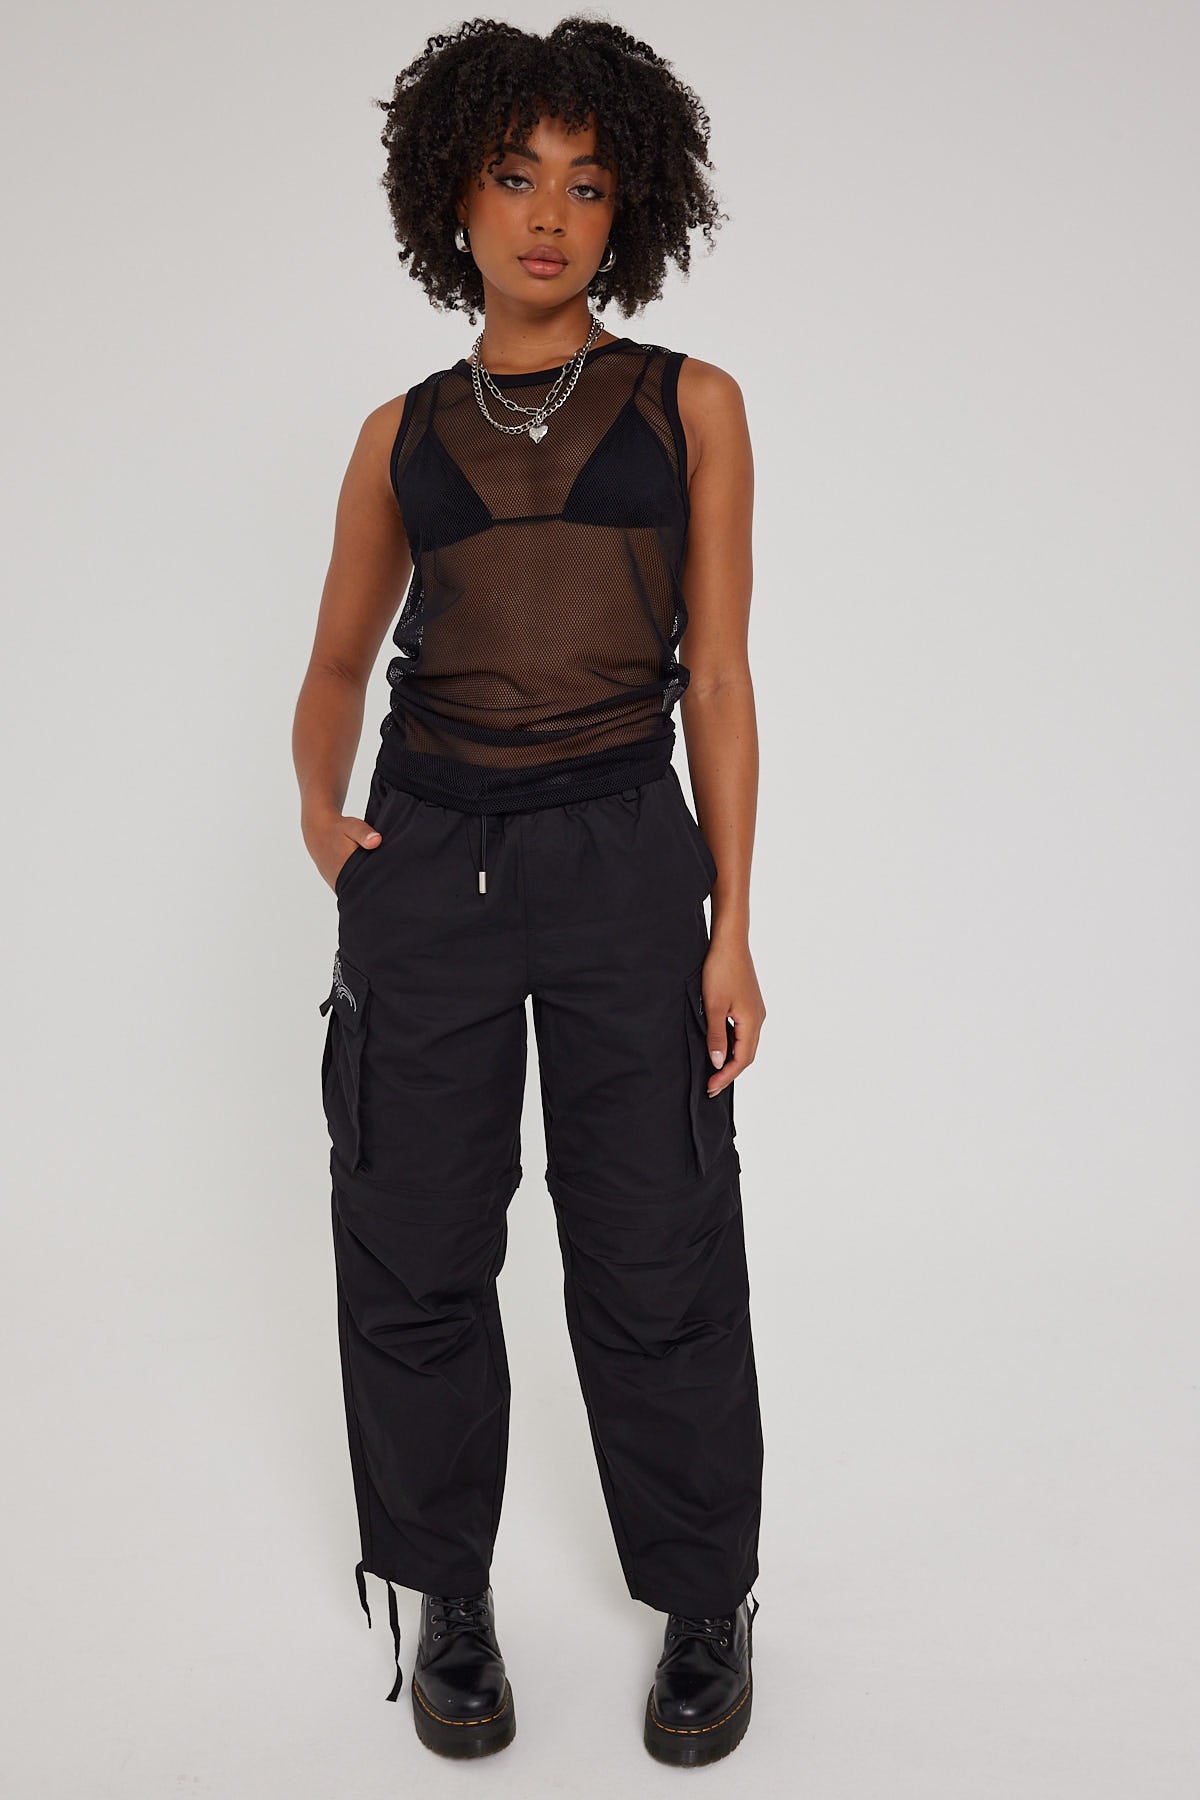 Black Cargo Pants with Black and Gold Athletic Shoes Relaxed Summer Outfits  In Their 20s (5 ideas & outfits) | Lookastic